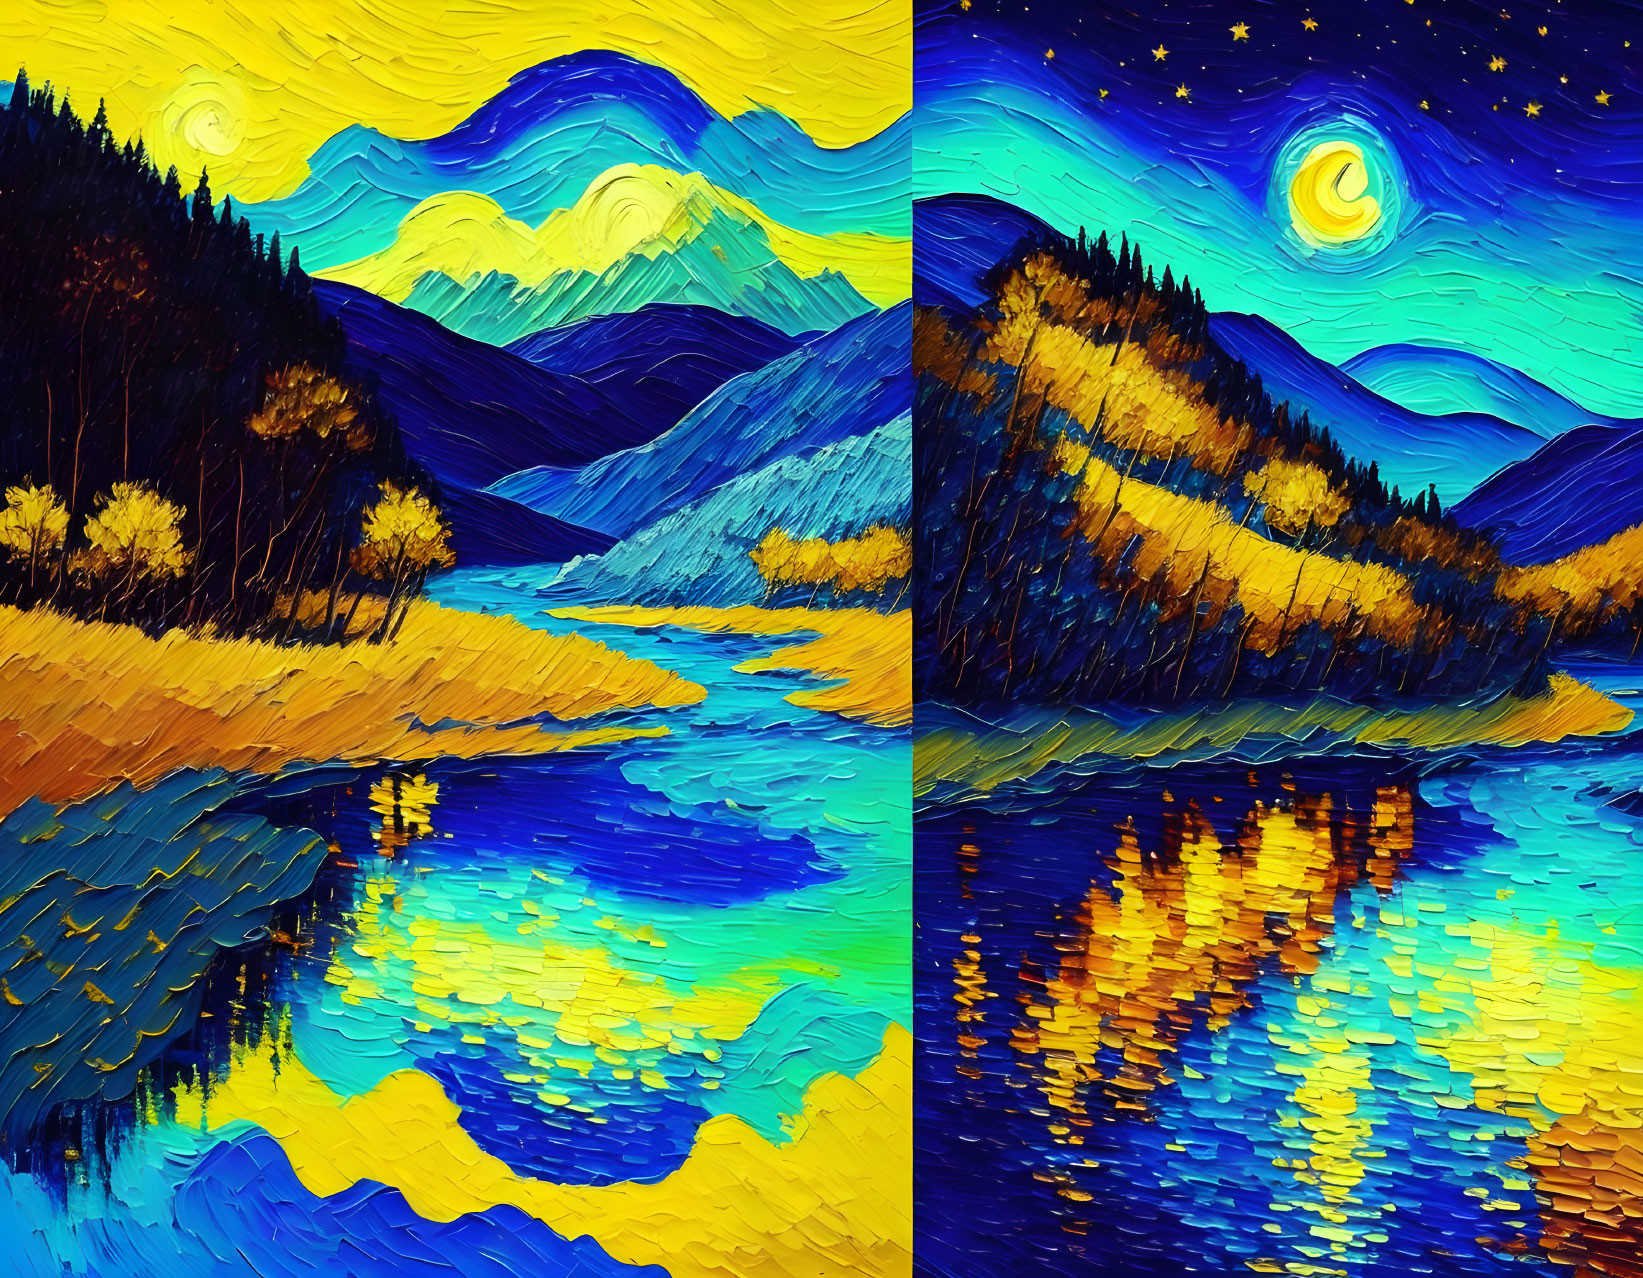 Colorful Diptych: Van Gogh-Inspired Landscapes with Swirling Skies